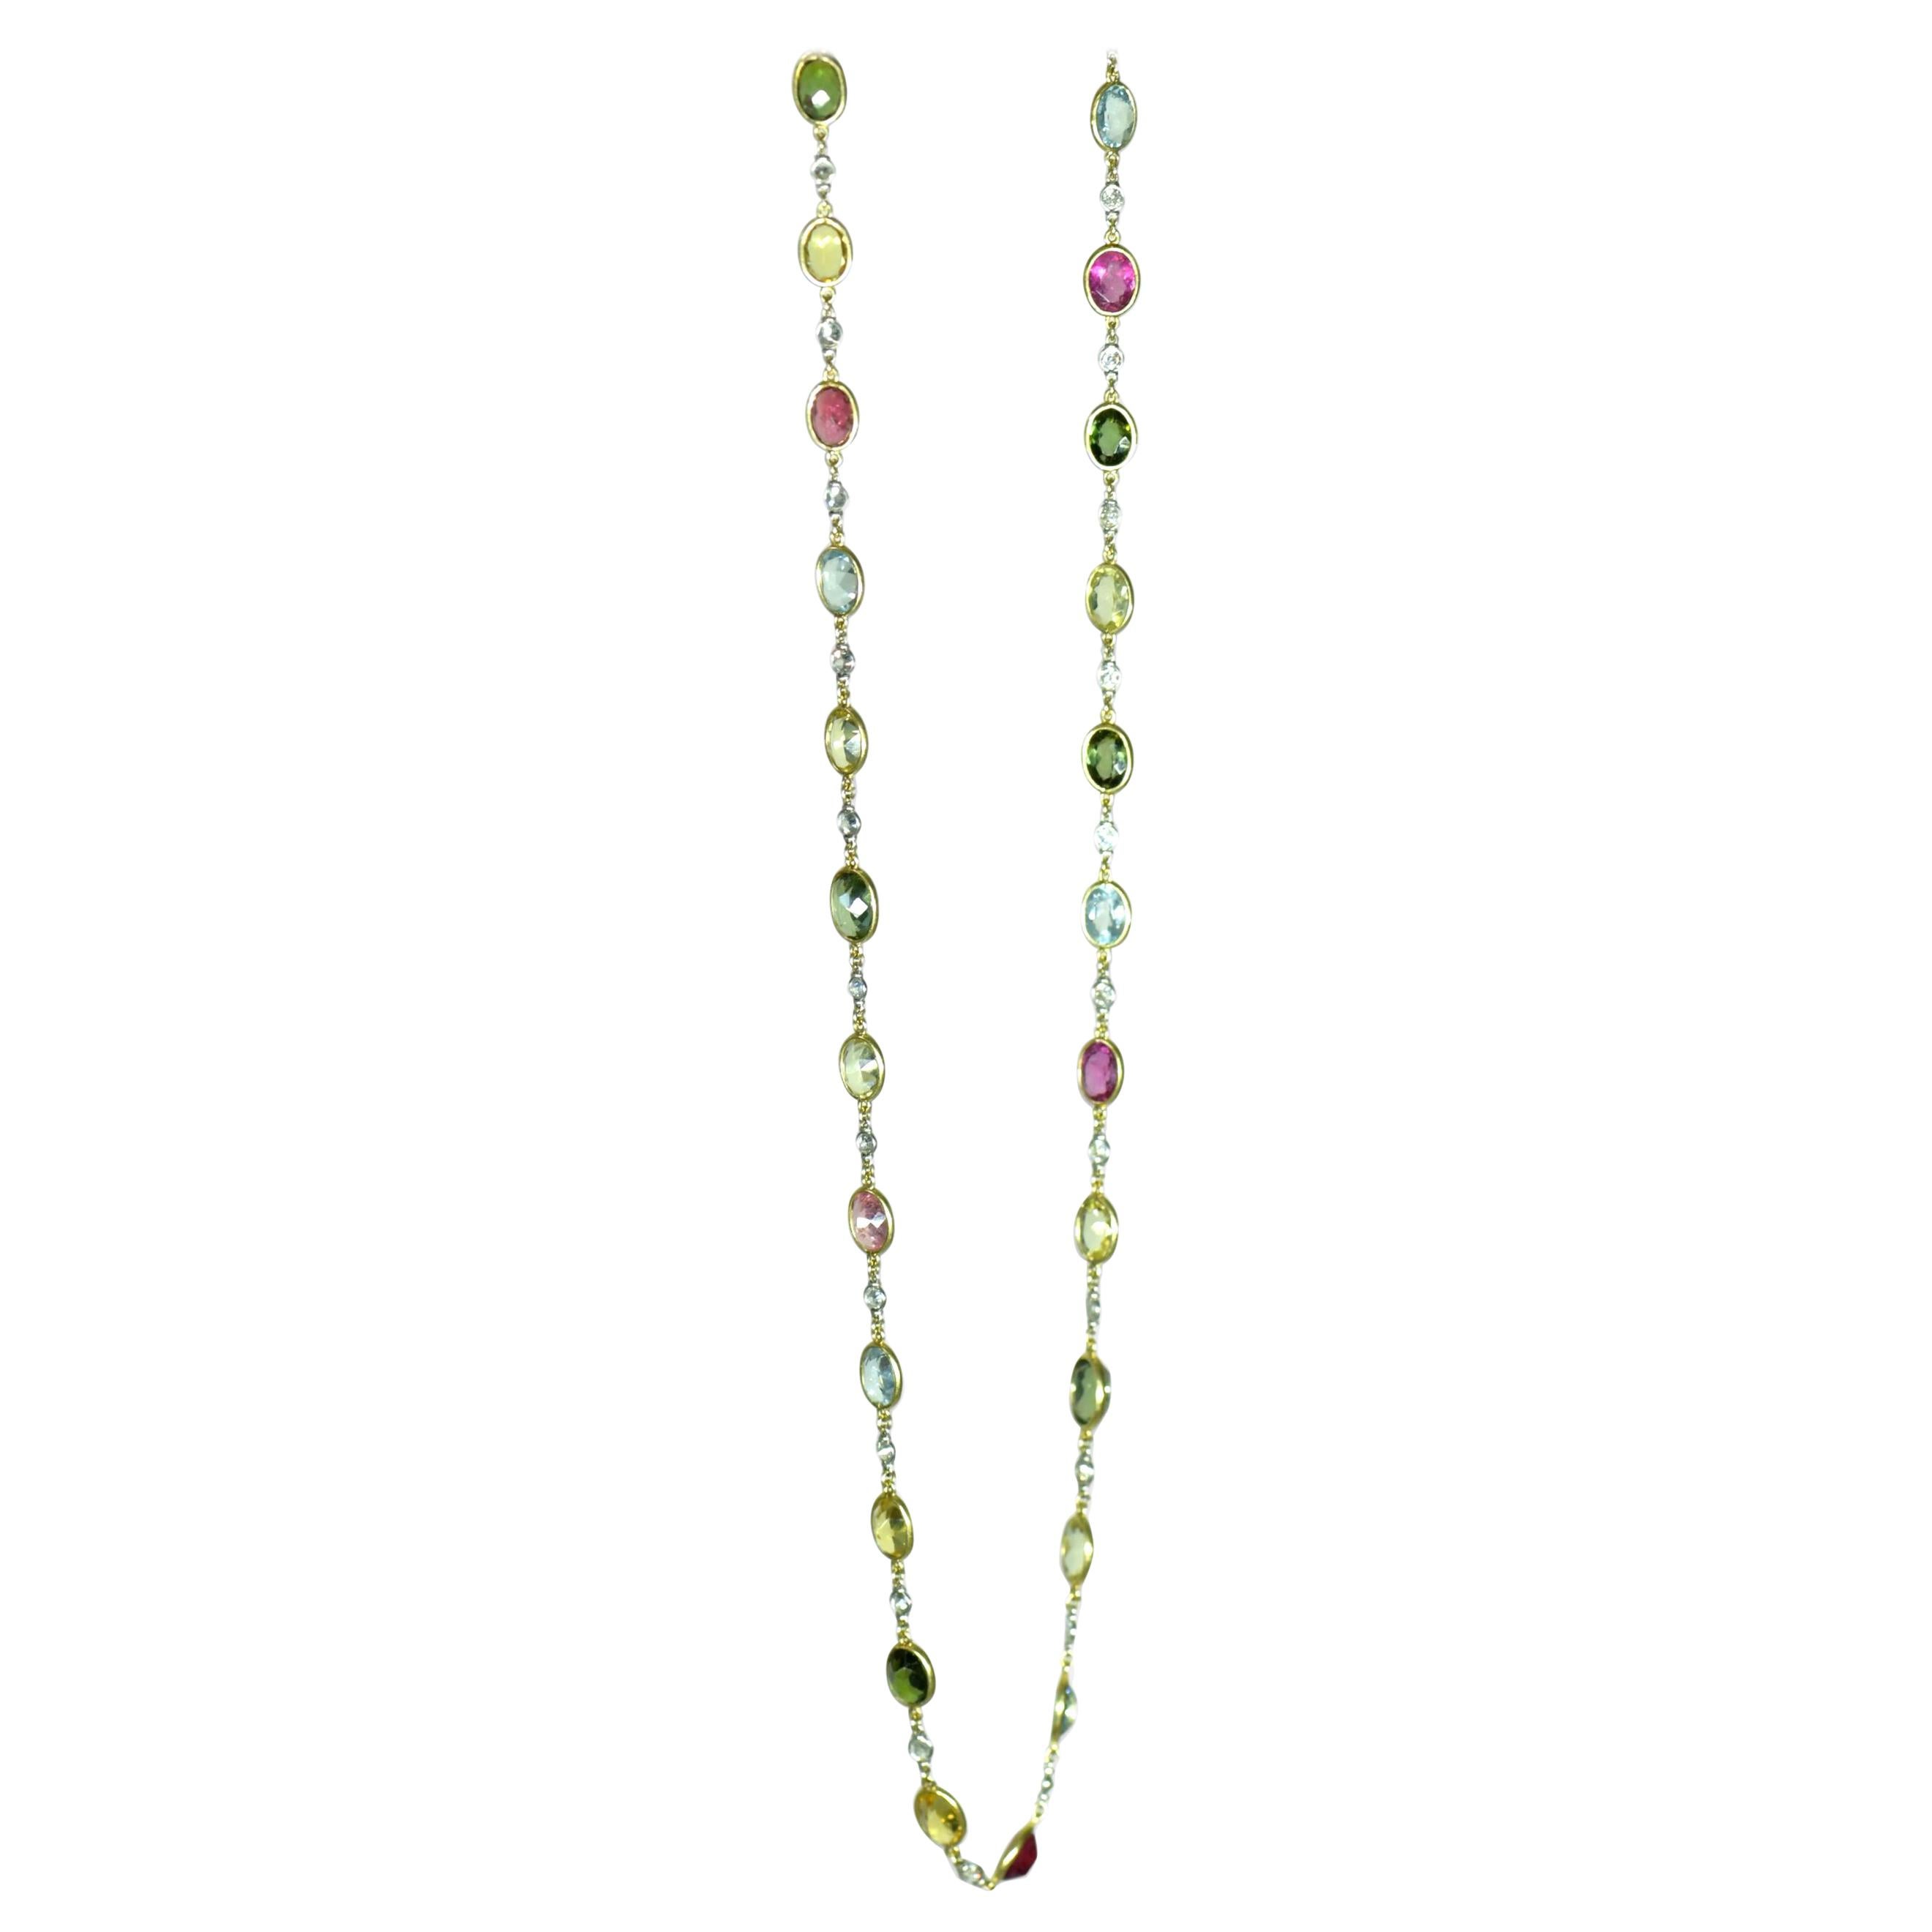 14K Yellow Gold Necklace With Multi-Shaped and Multi-Colored Gemstones 20 Inches